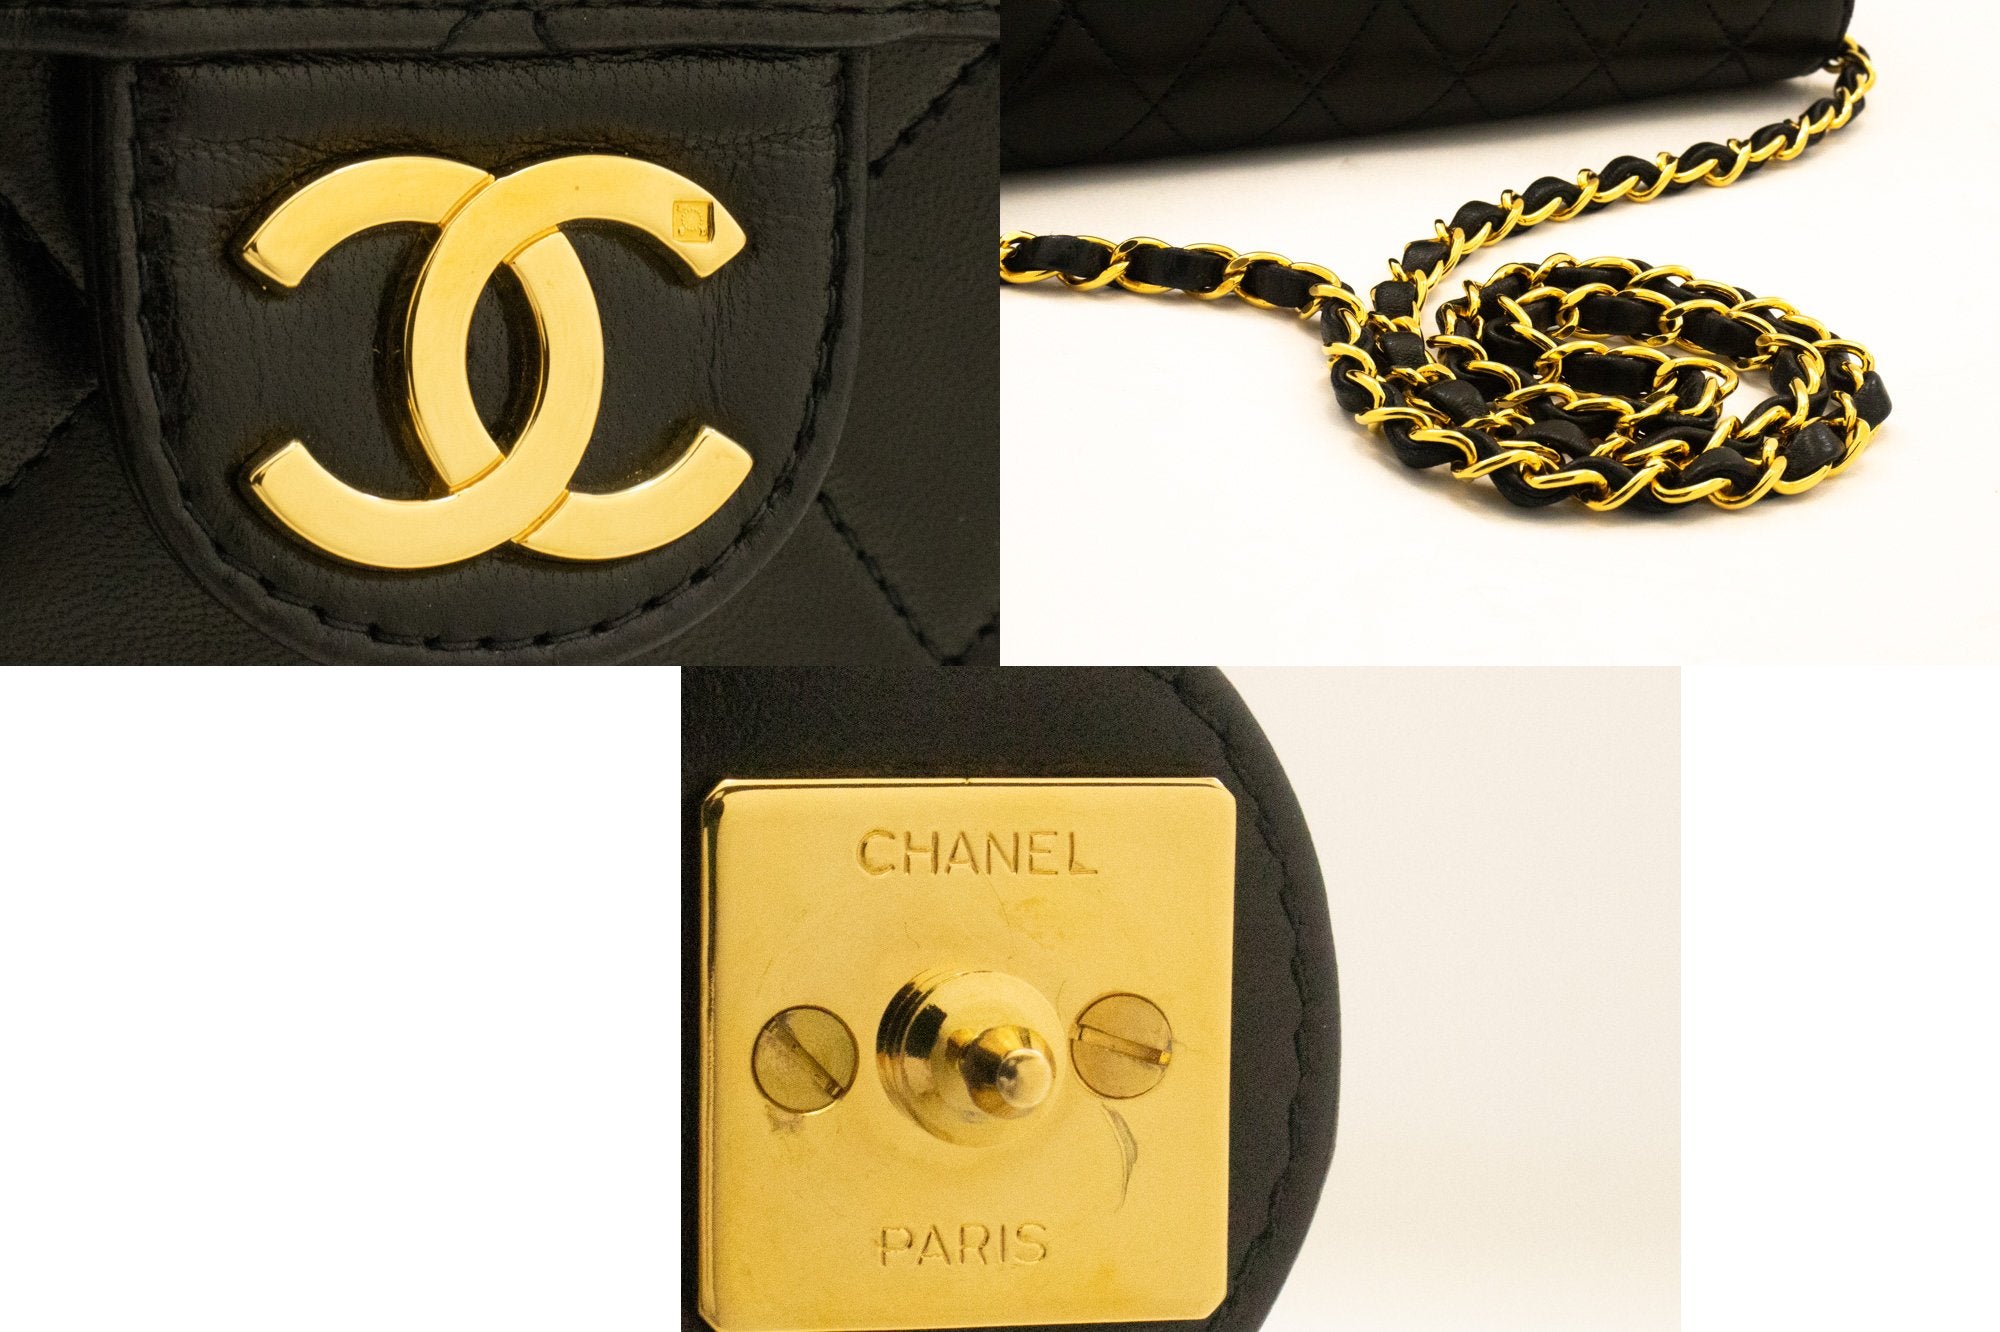 Chanel Chain Shoulder Bag Clutch Black Quilted Flap Lambskin Purse K36